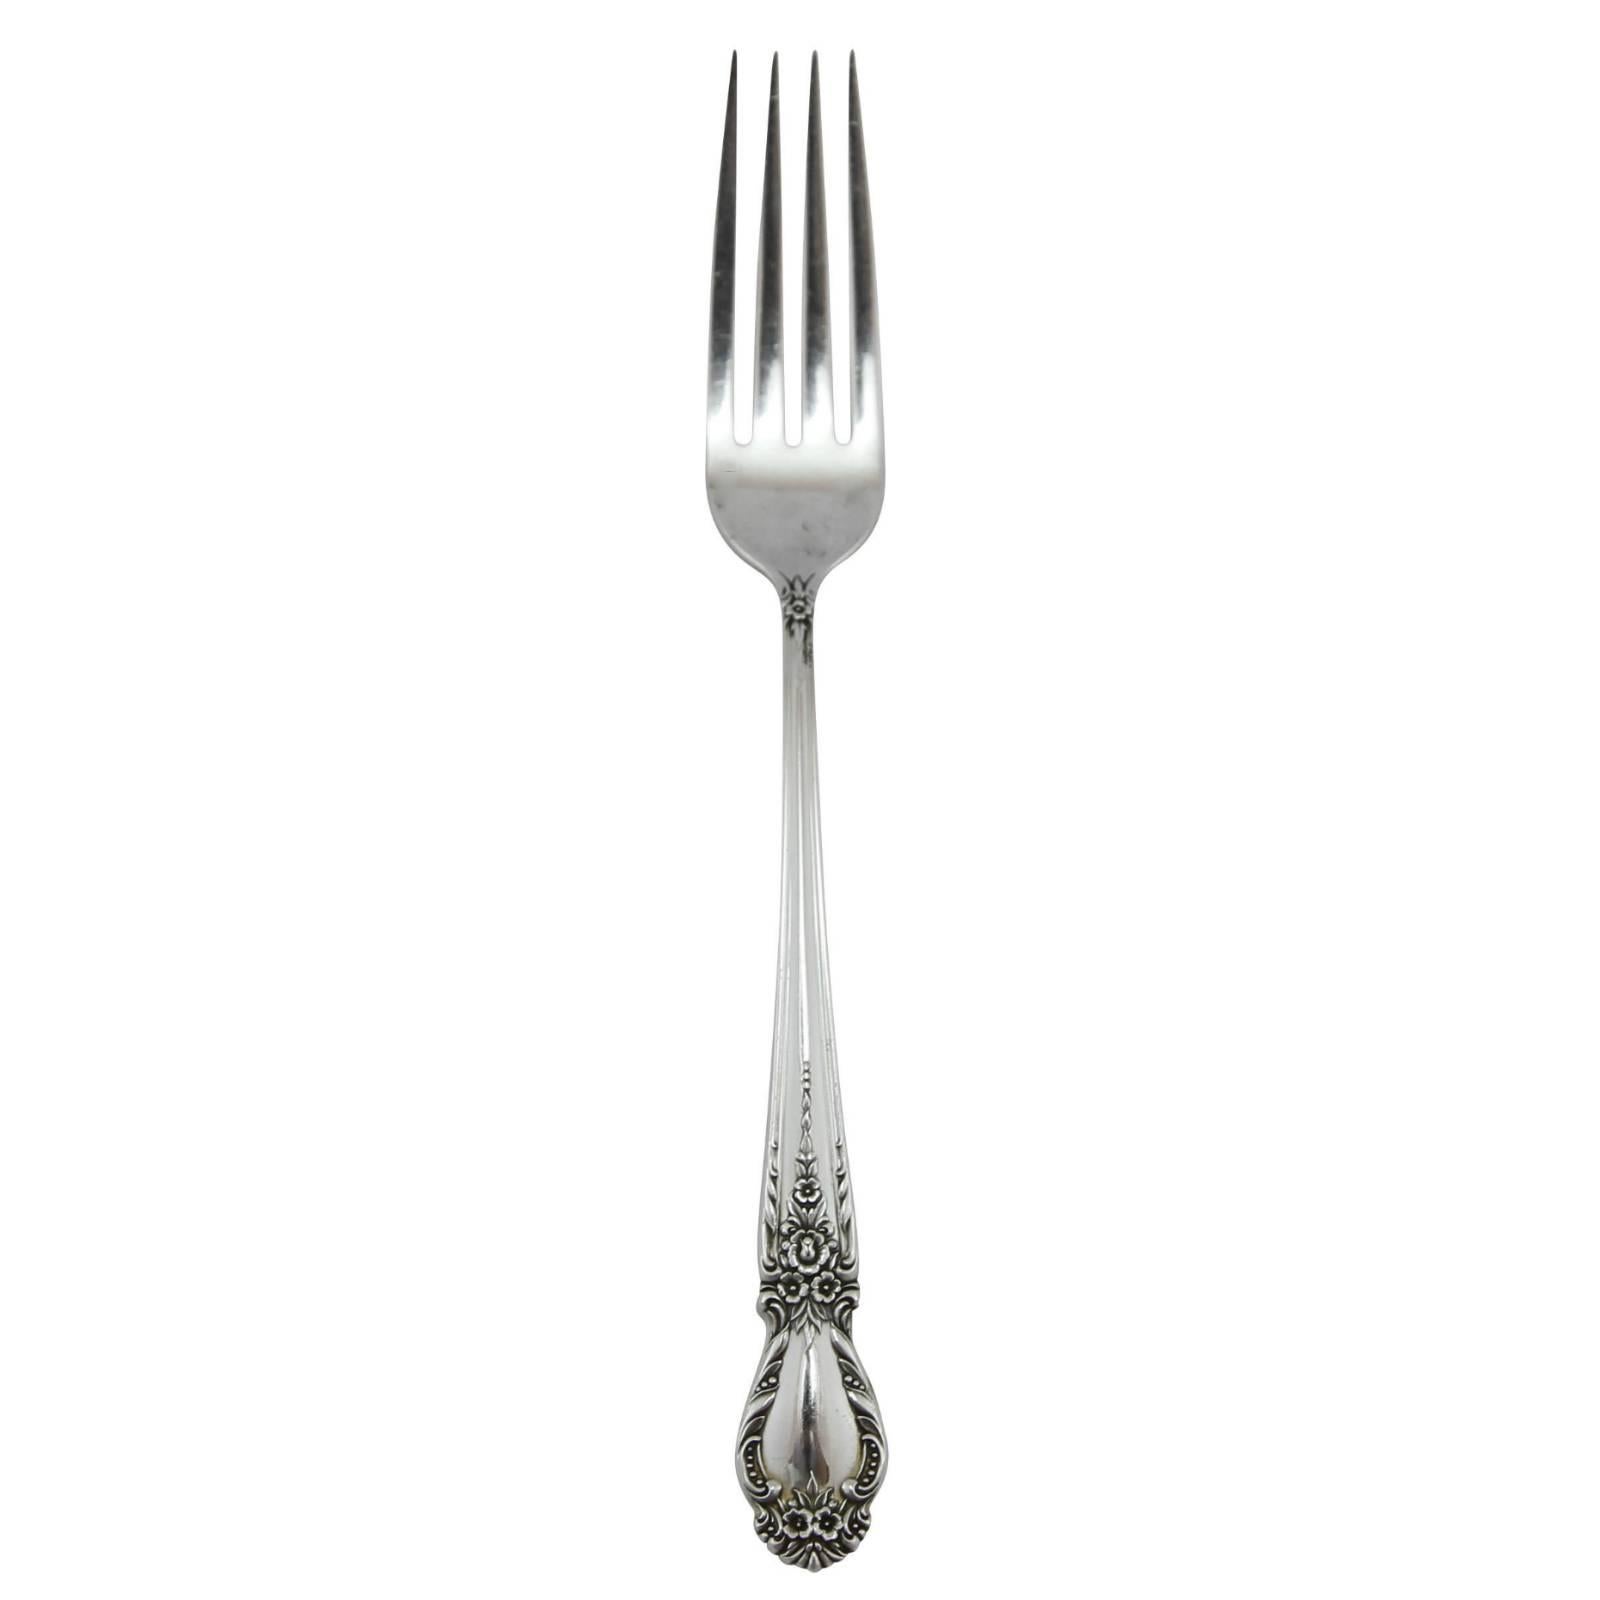 A 69 piece sterling silver flatware set by the International Silver Company, in the ‘Brocade’ pattern. A beautiful Mid-Century style pattern, Brocade is a decorative floral style pattern with elegant detailing. A six-piece settling for 12